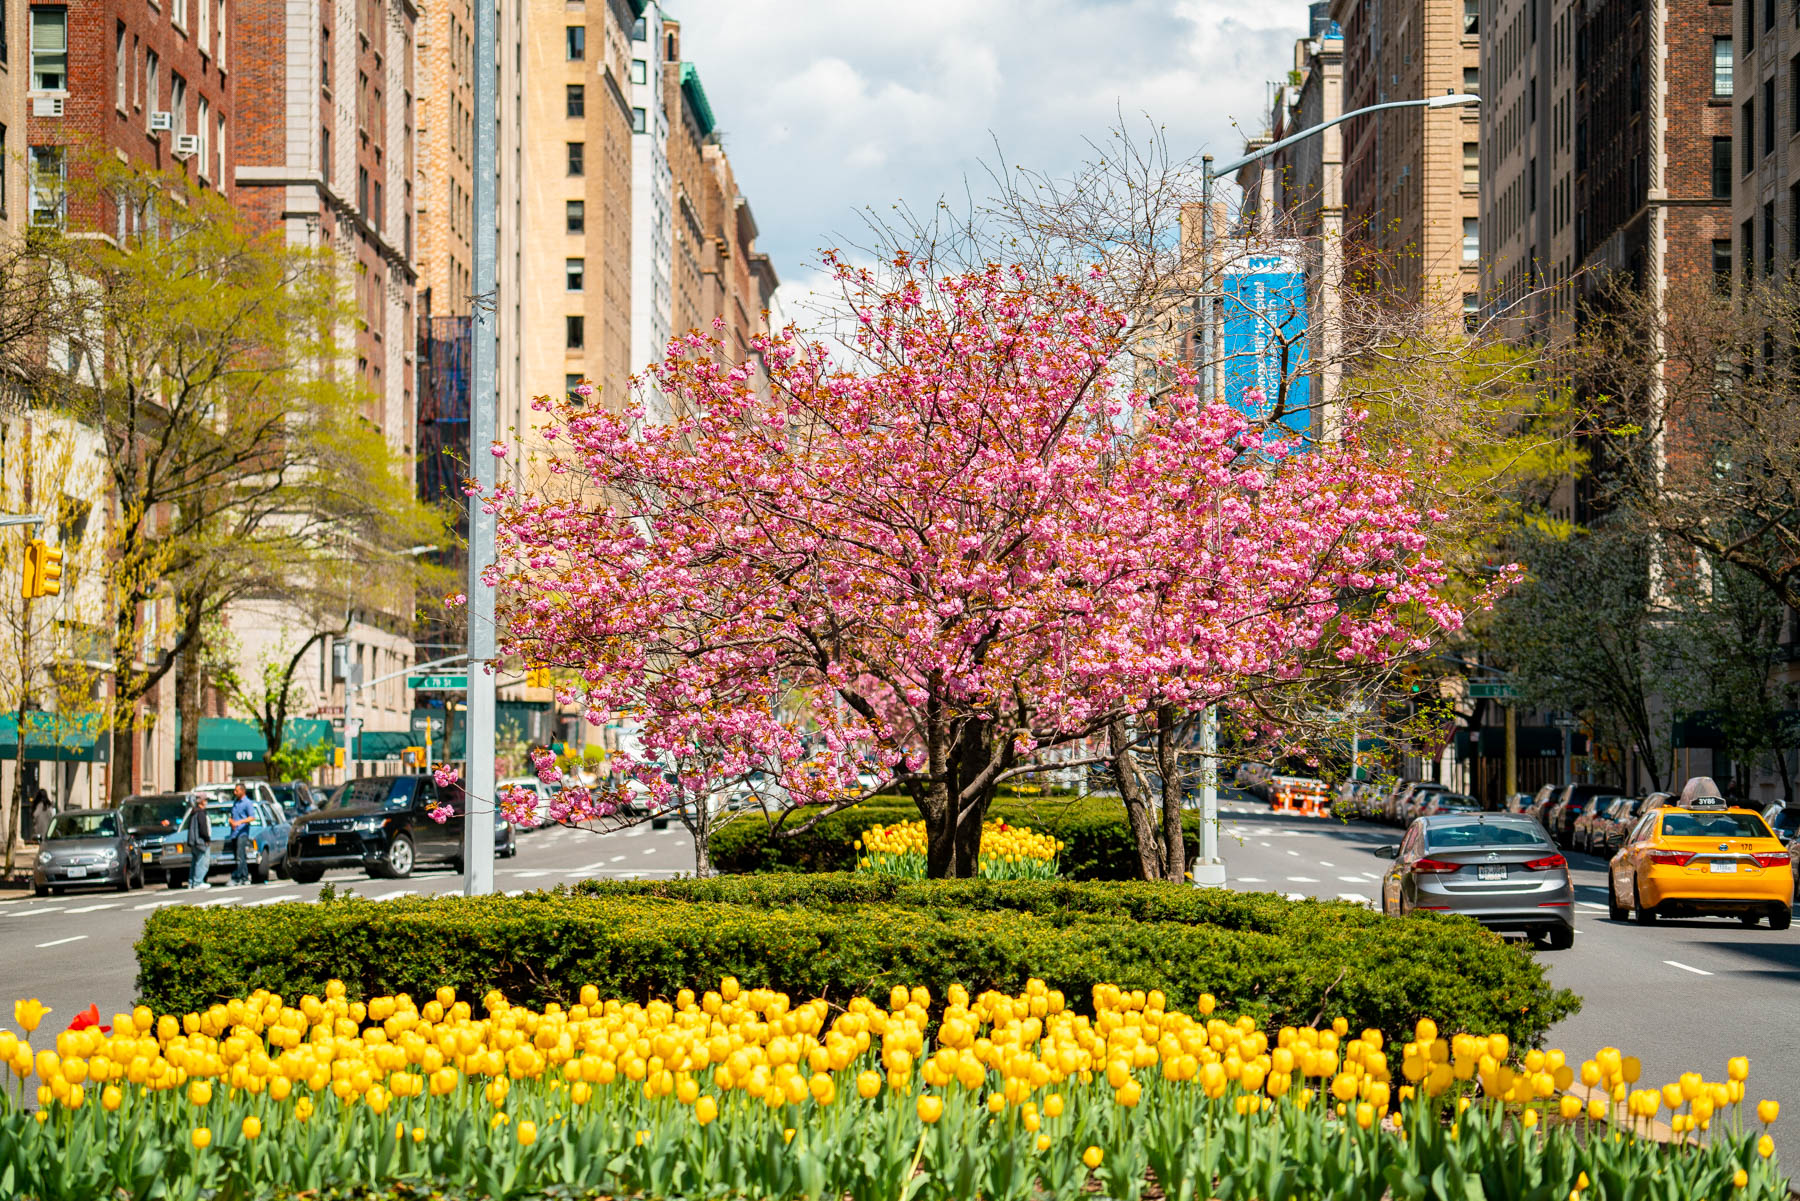 Park Avenue Tulips
best spring blooms NYC